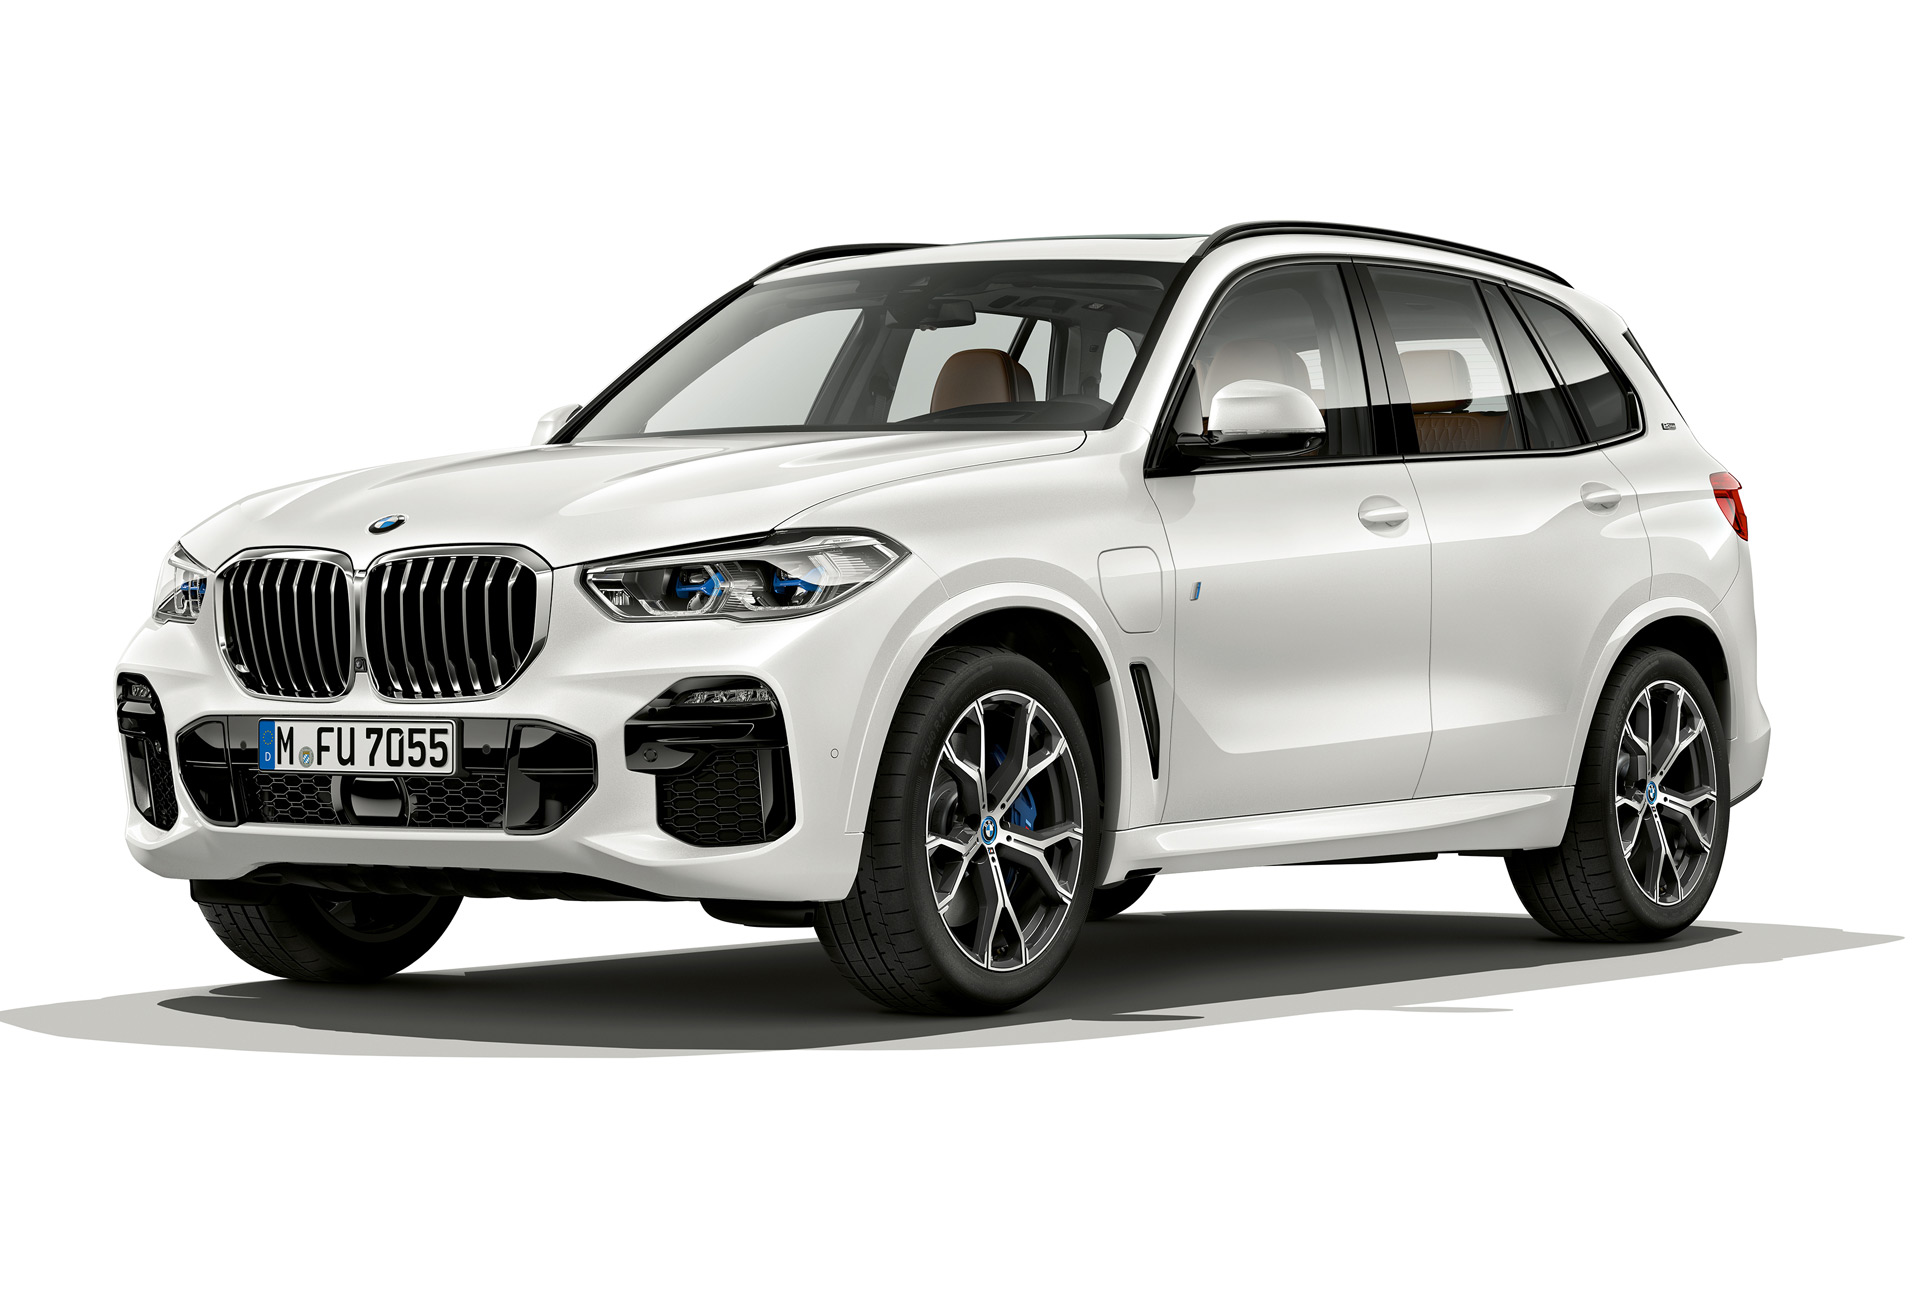 2021 BMW X5 xDrive45e plug-in hybrid will have more range, 6 cylinders